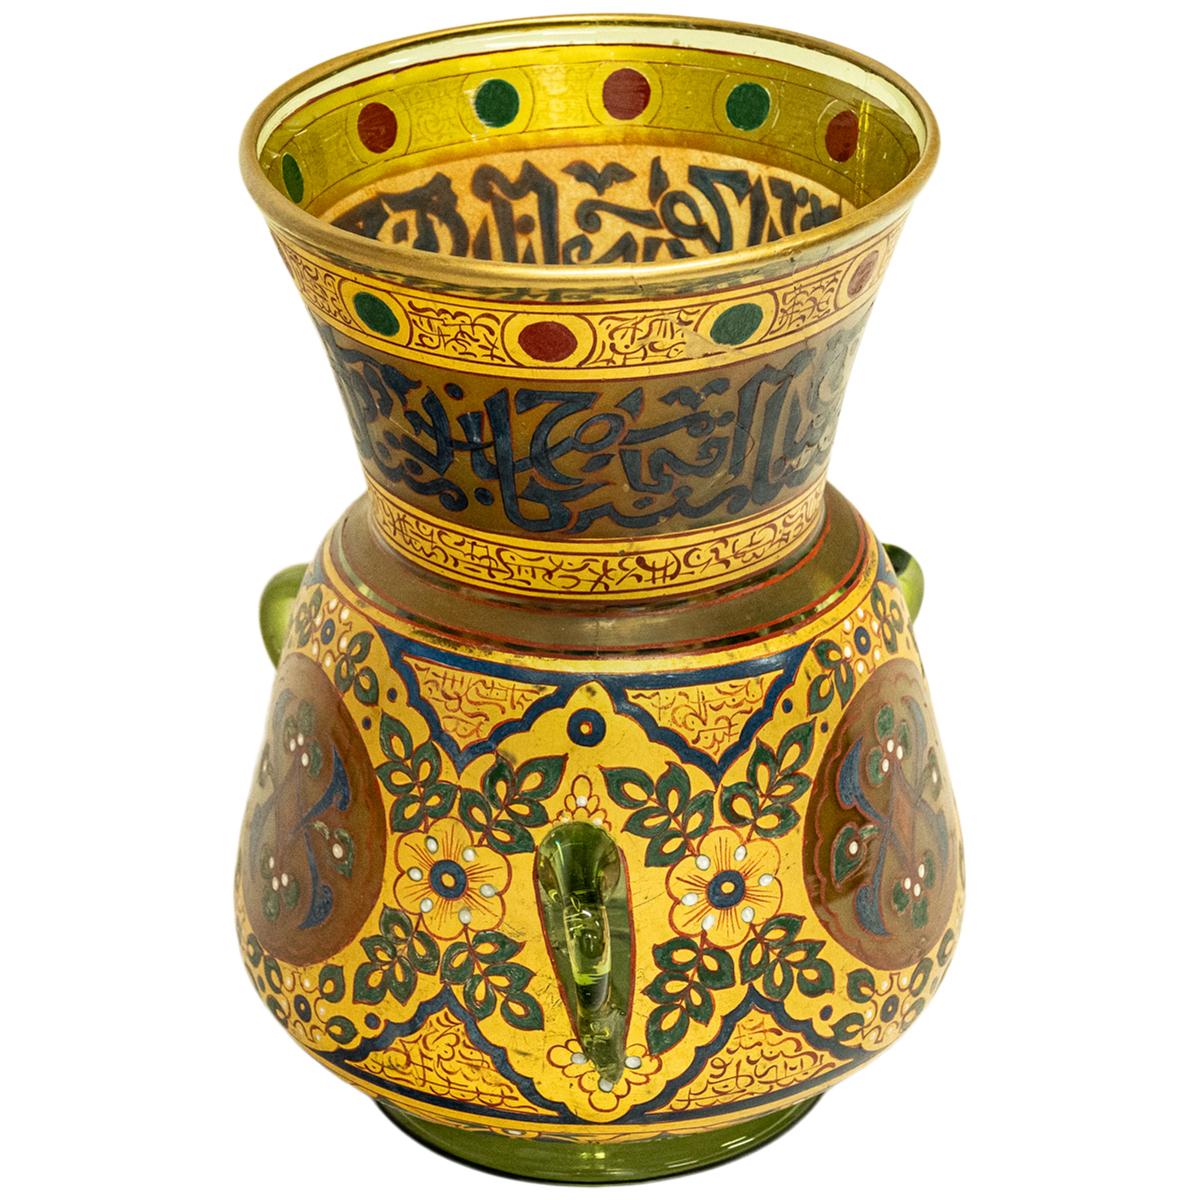 Antique French Islamic Glass Enamel Gilt Mamluk Revival Mosque Lamp Brocard 1880 For Sale 8